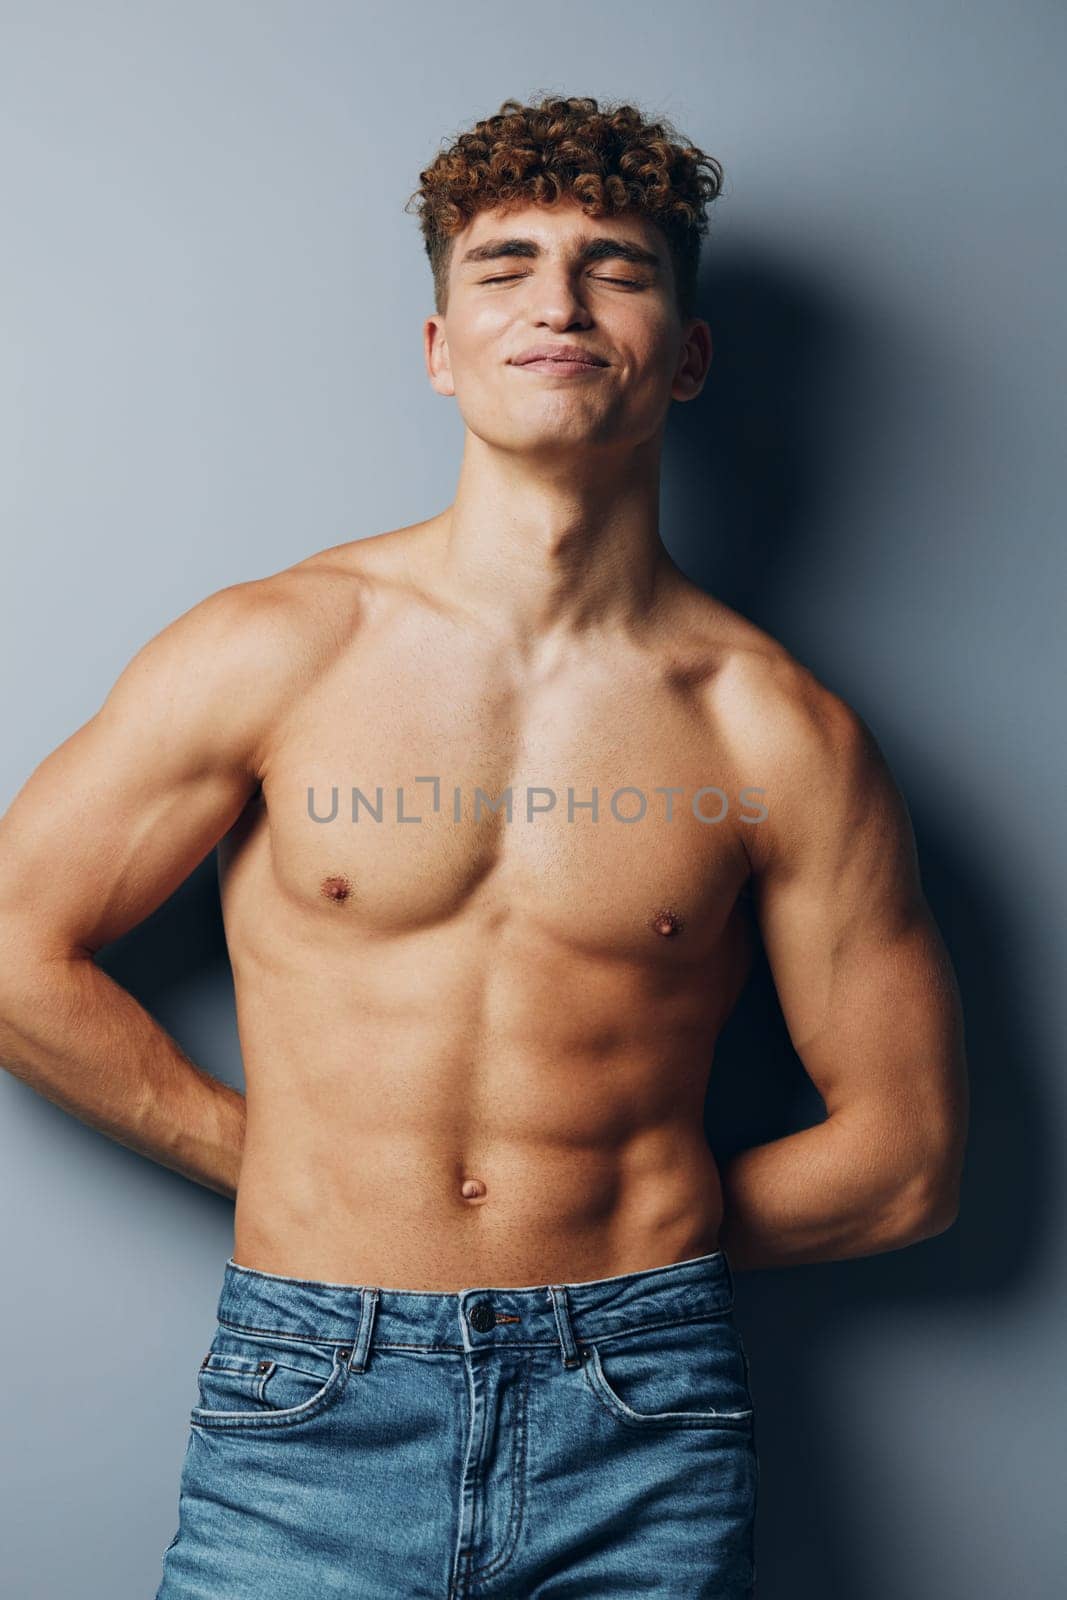 man person shirtless beauty gray background athlete lifestyle fitness bodybuilder muscular chest adult sexy athletic curly studio guy smile